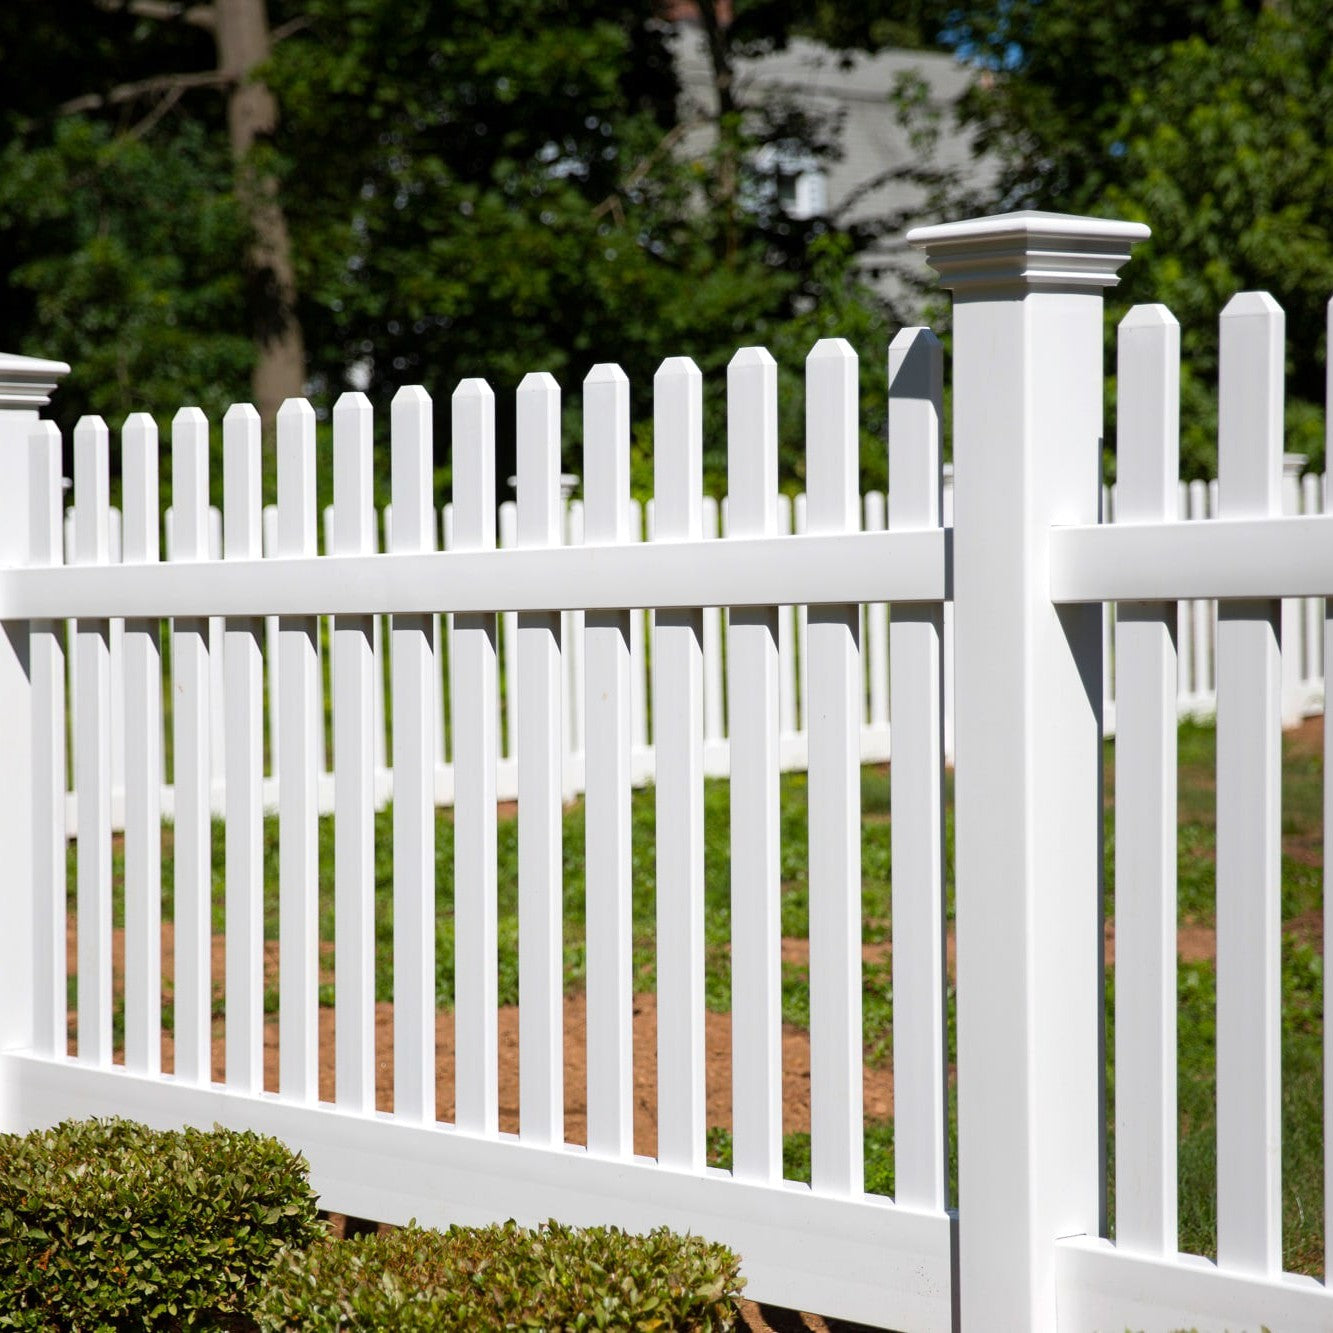 Silverbell Haven Series - Fence Panel - 4' x 8'-Vinyl Fence Panels-ActiveYards-White-FenceCenter